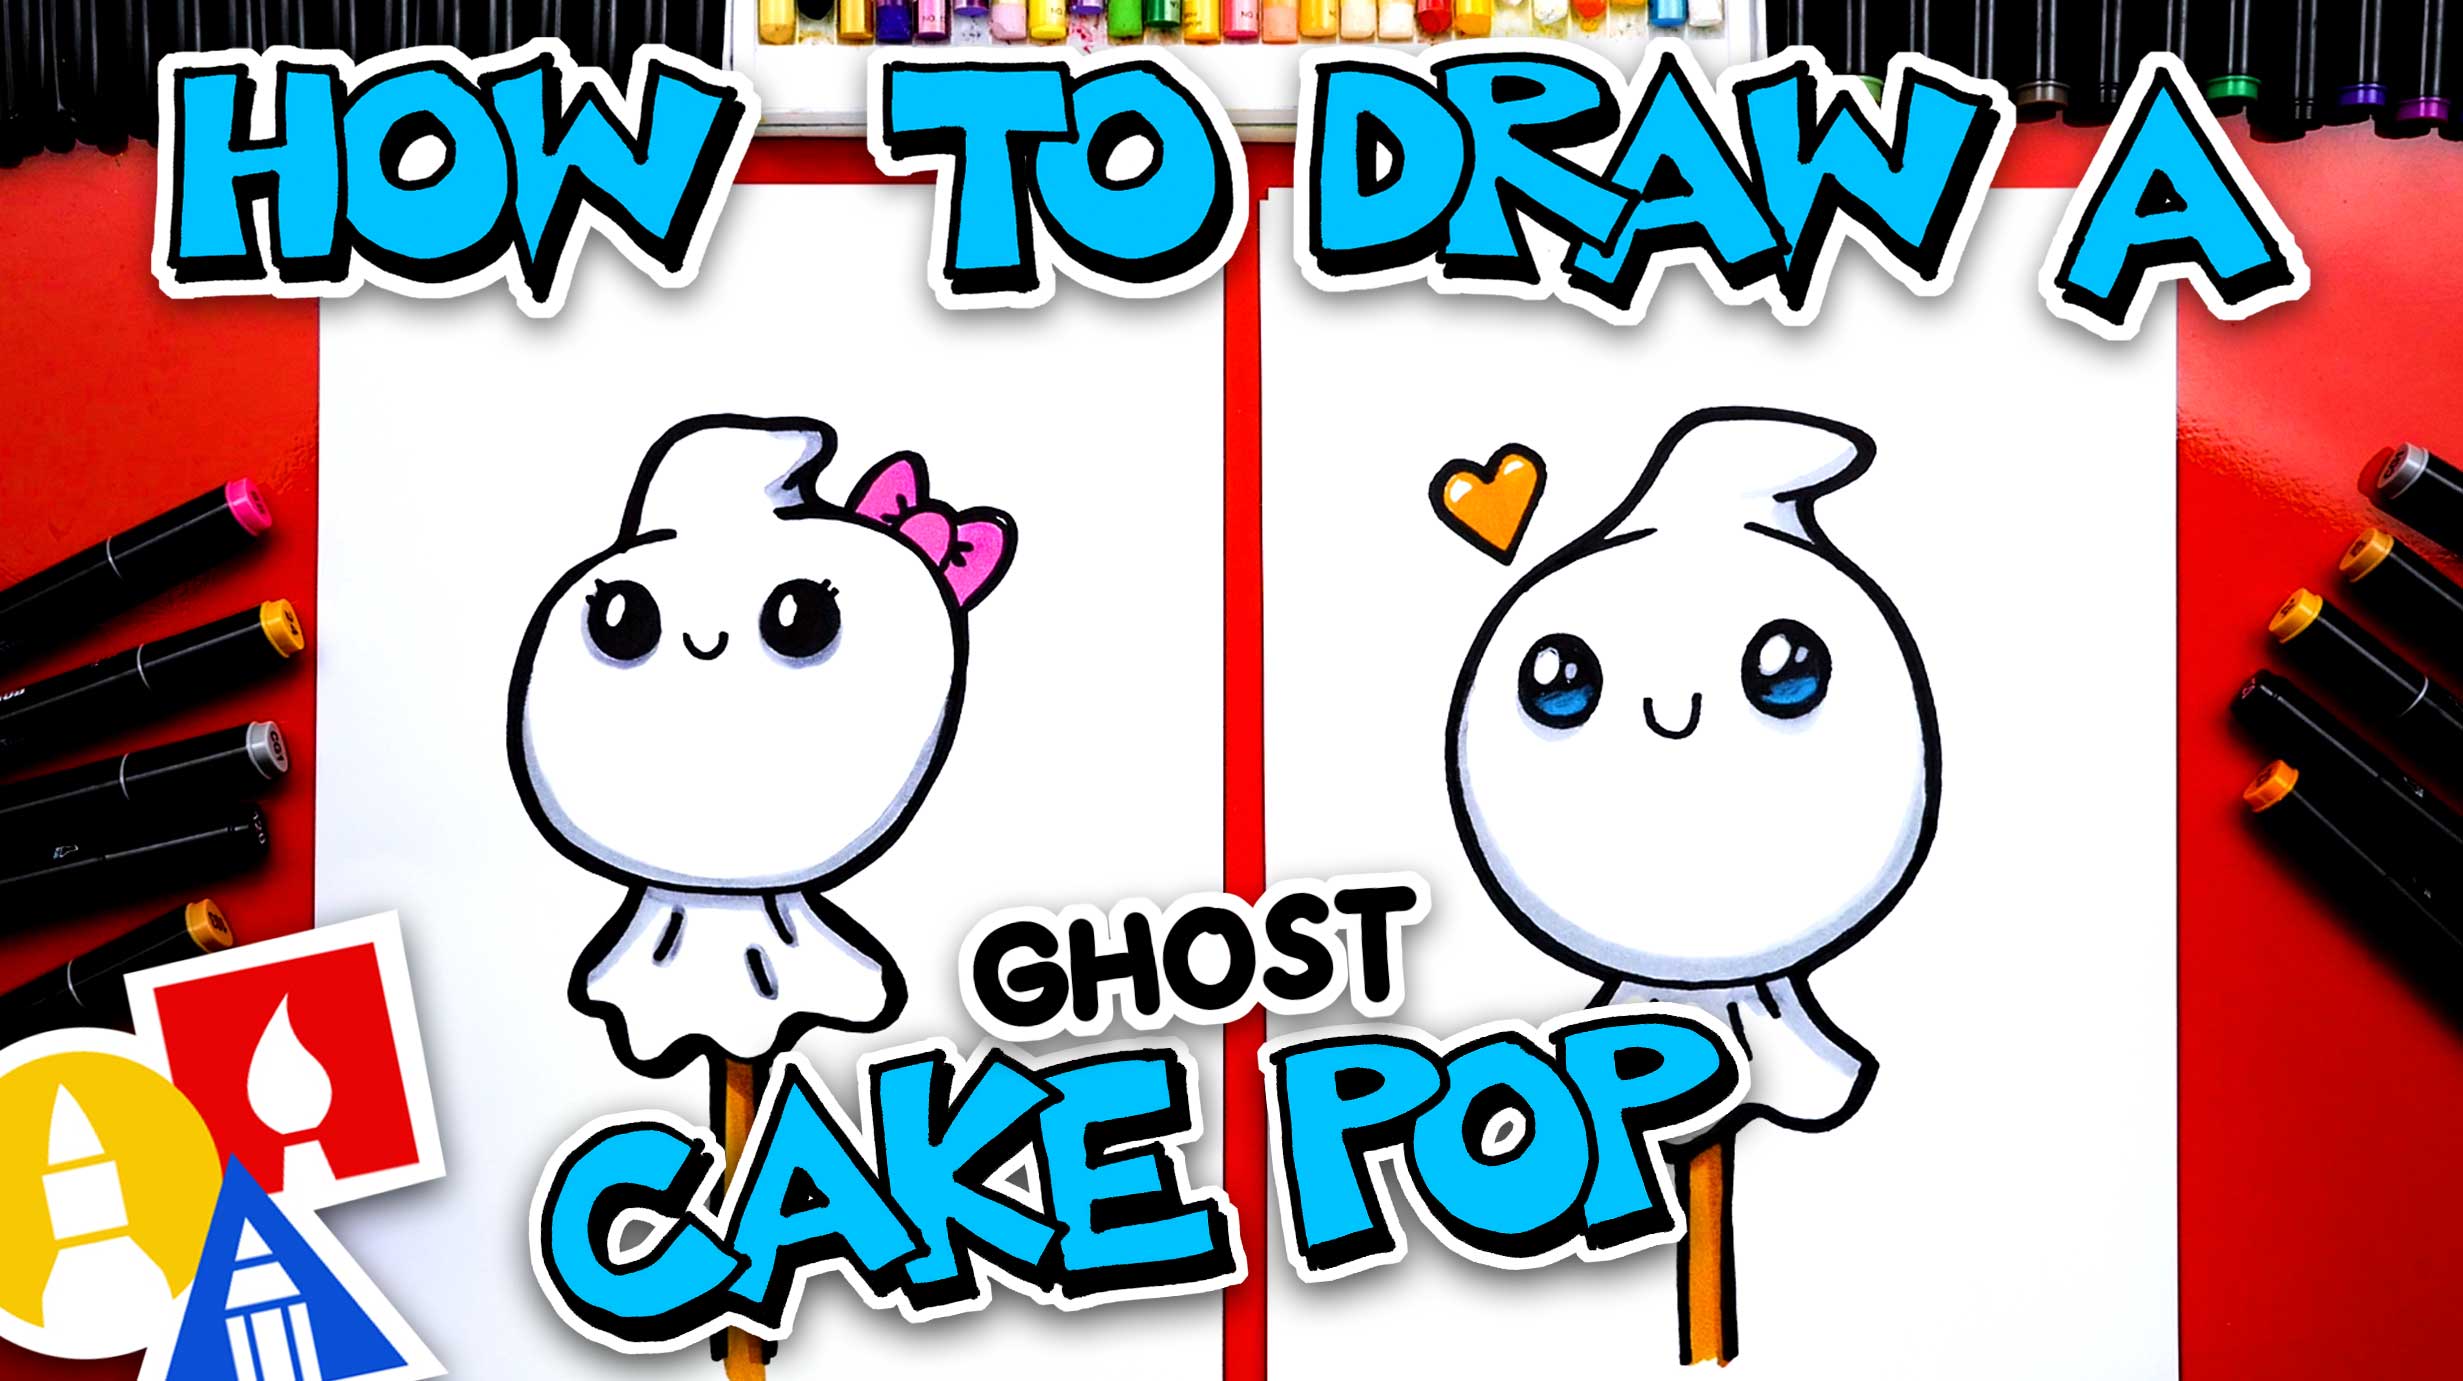 ghost drawings for halloween